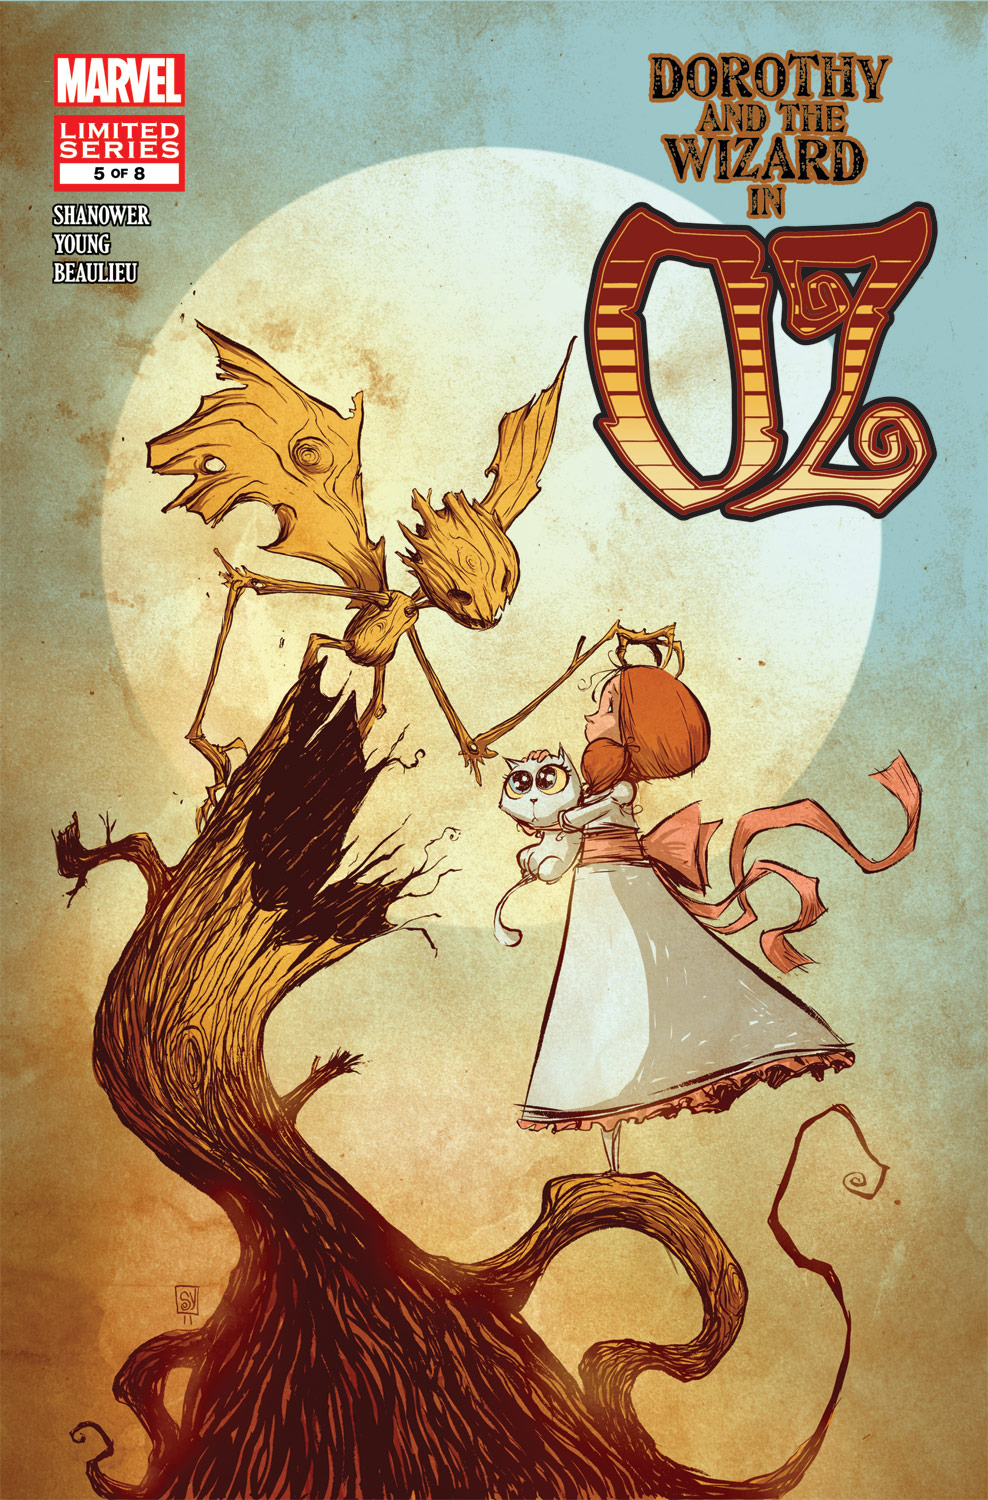 Dorothy & the Wizard in Oz (2011) #5